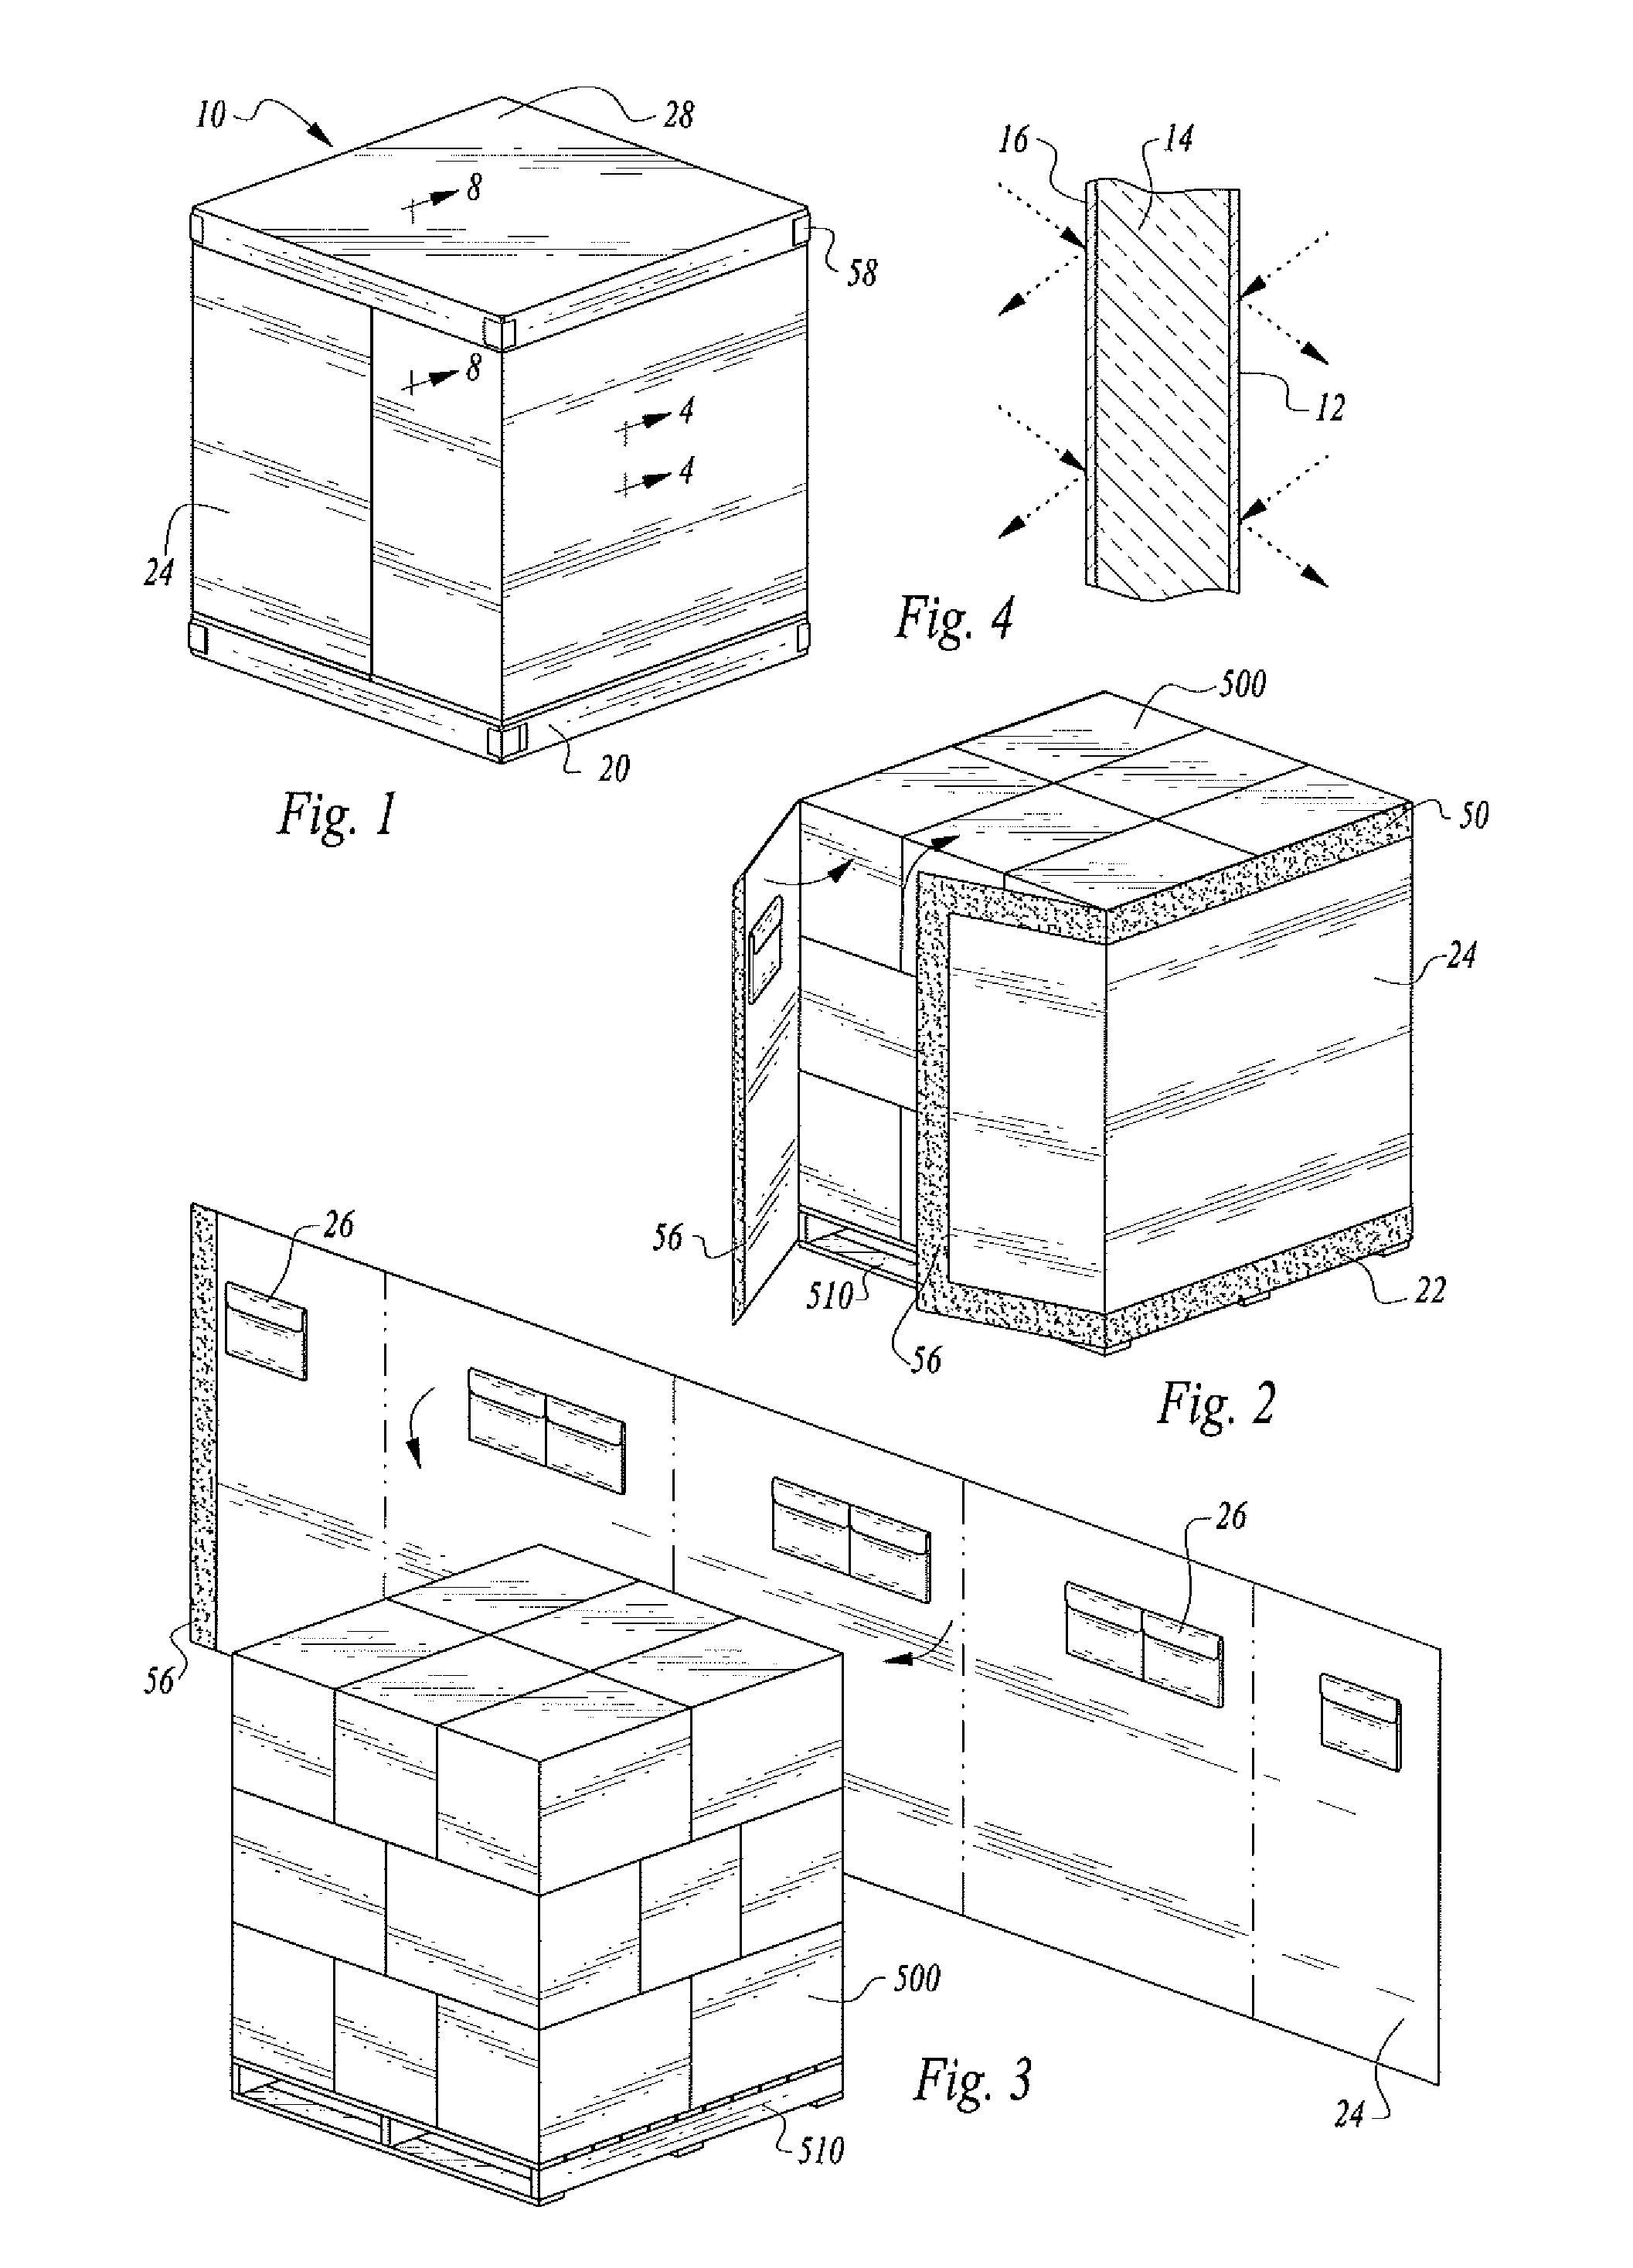 Thermally insulated, collapsible cover assembly and method of using to transport perishable produce